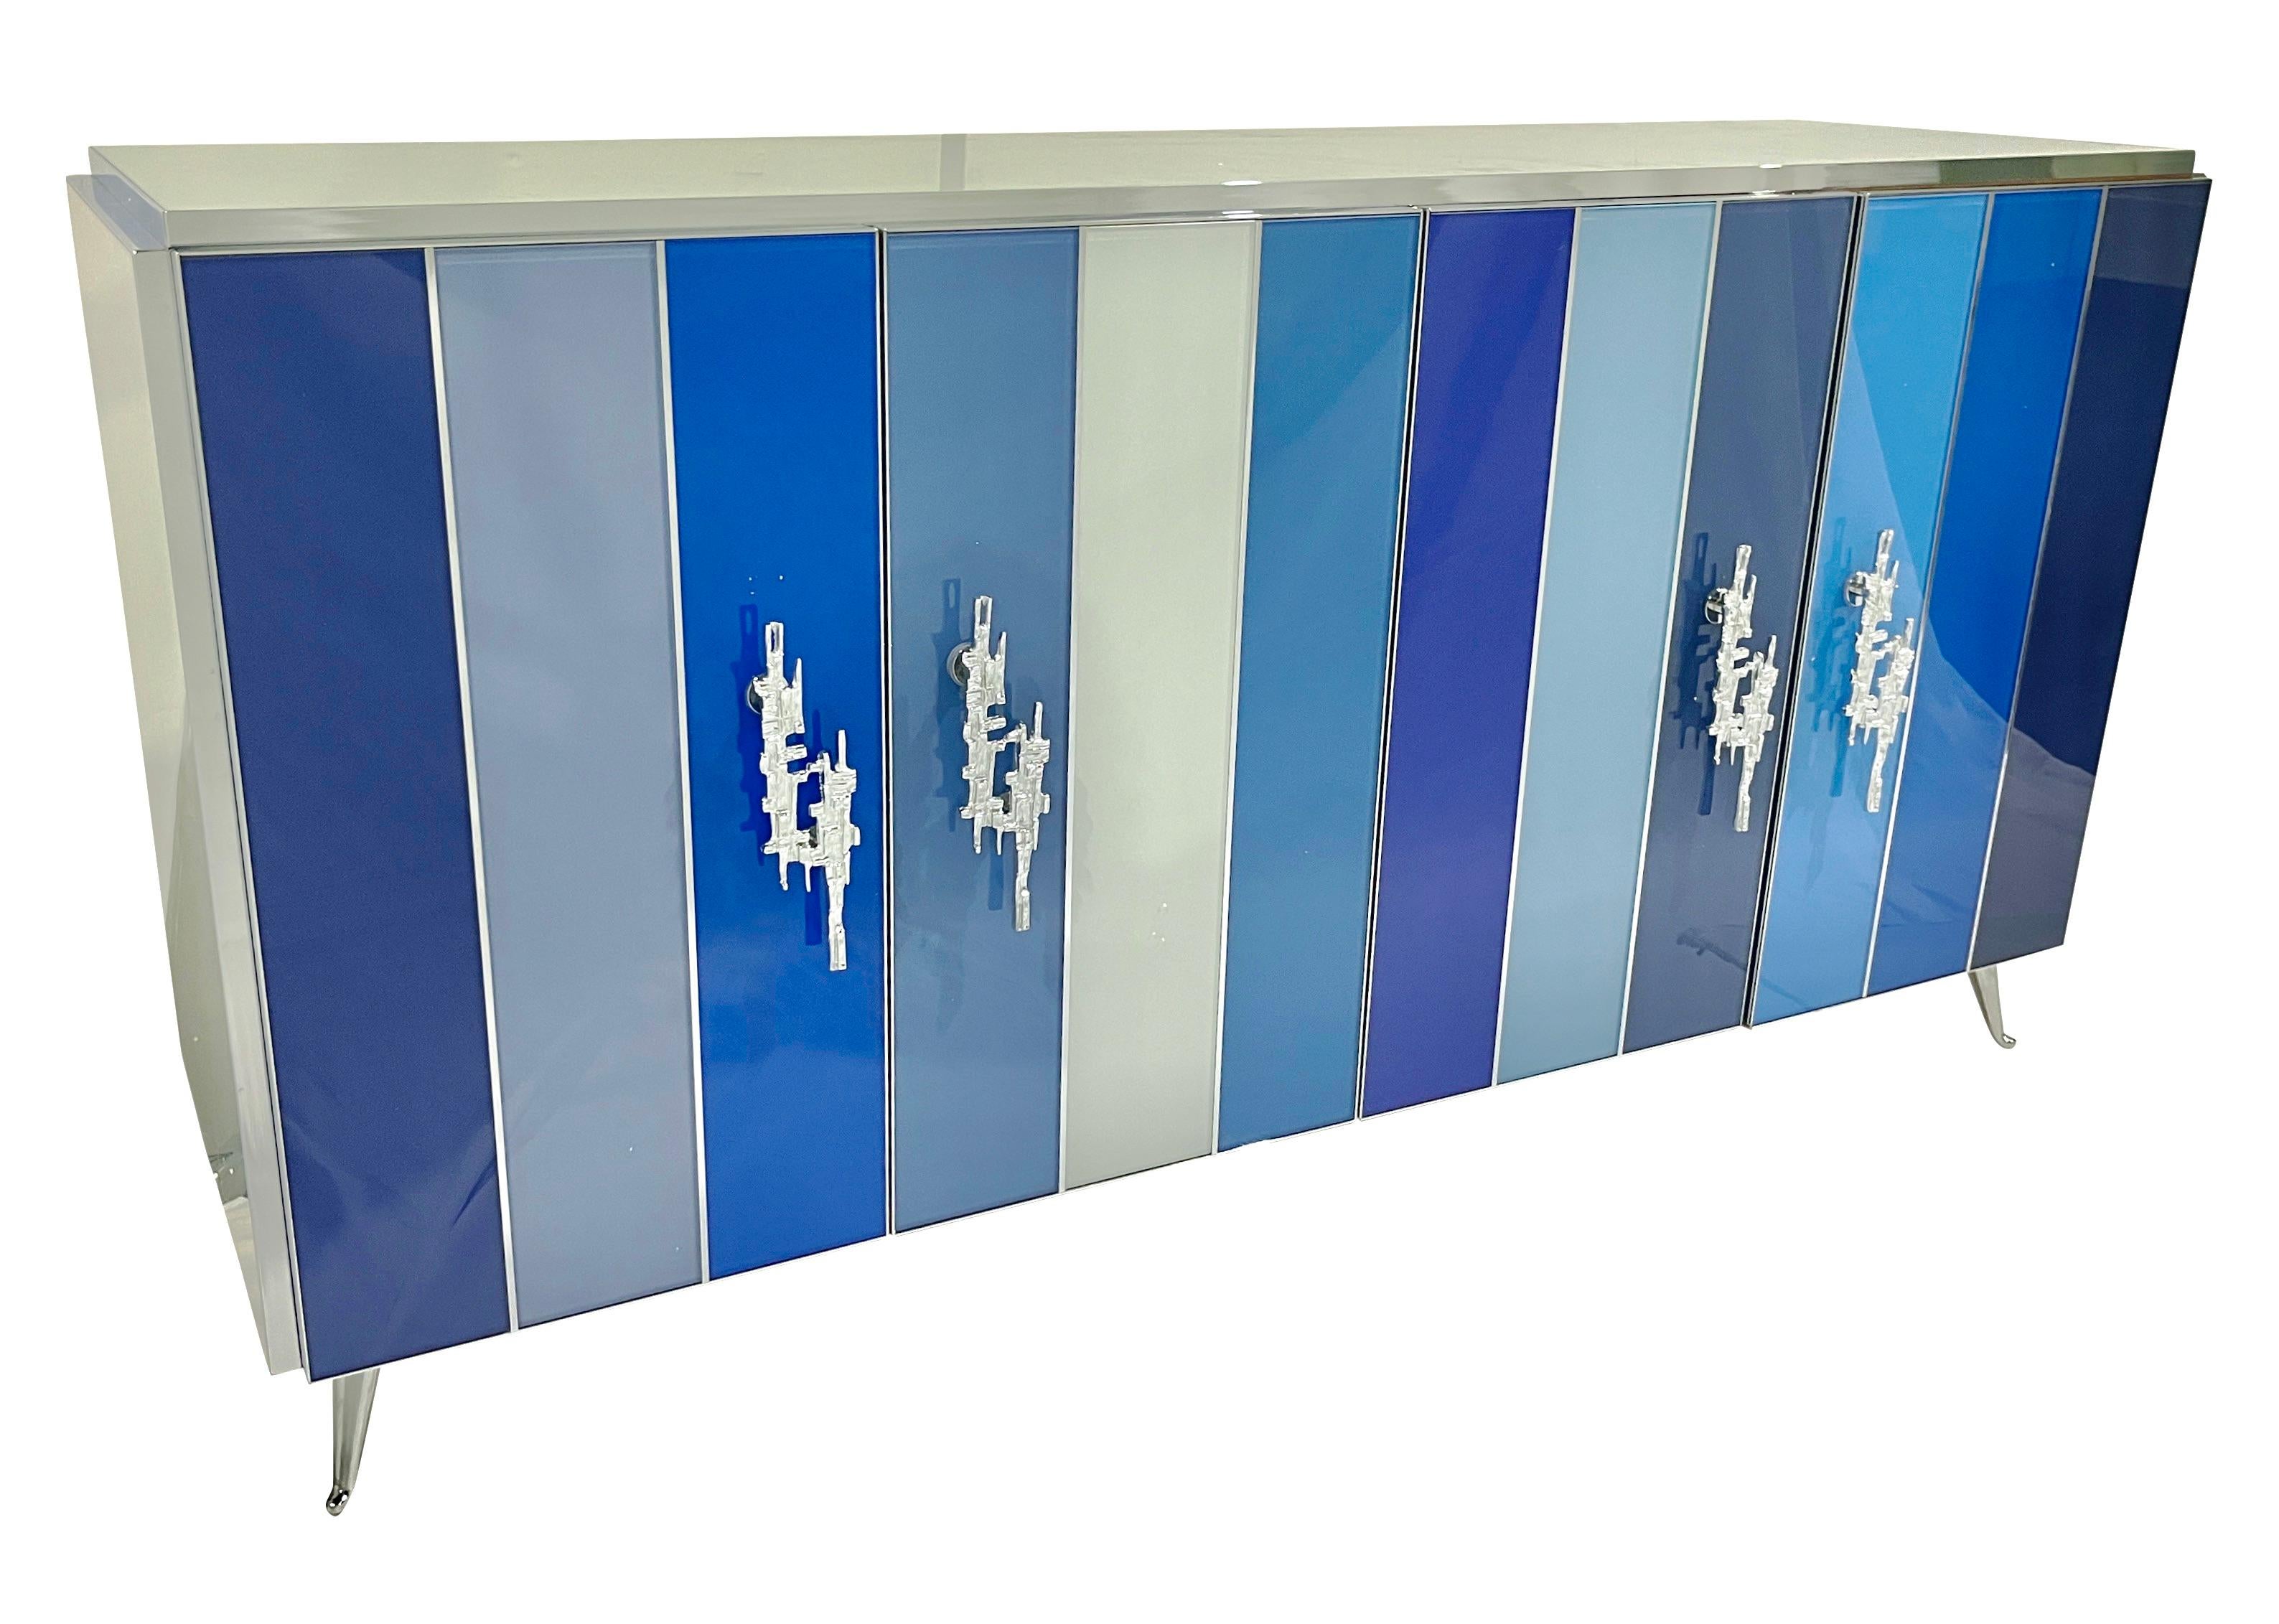 Bespoke custom made 4-door credenza/sideboard entirely handcrafted in Italy with elegant post modern decor, the surround decorated with art glass in an enticing striped light blue, sky blue, sea blue, turquoise, cobalt, shades of grays and white,